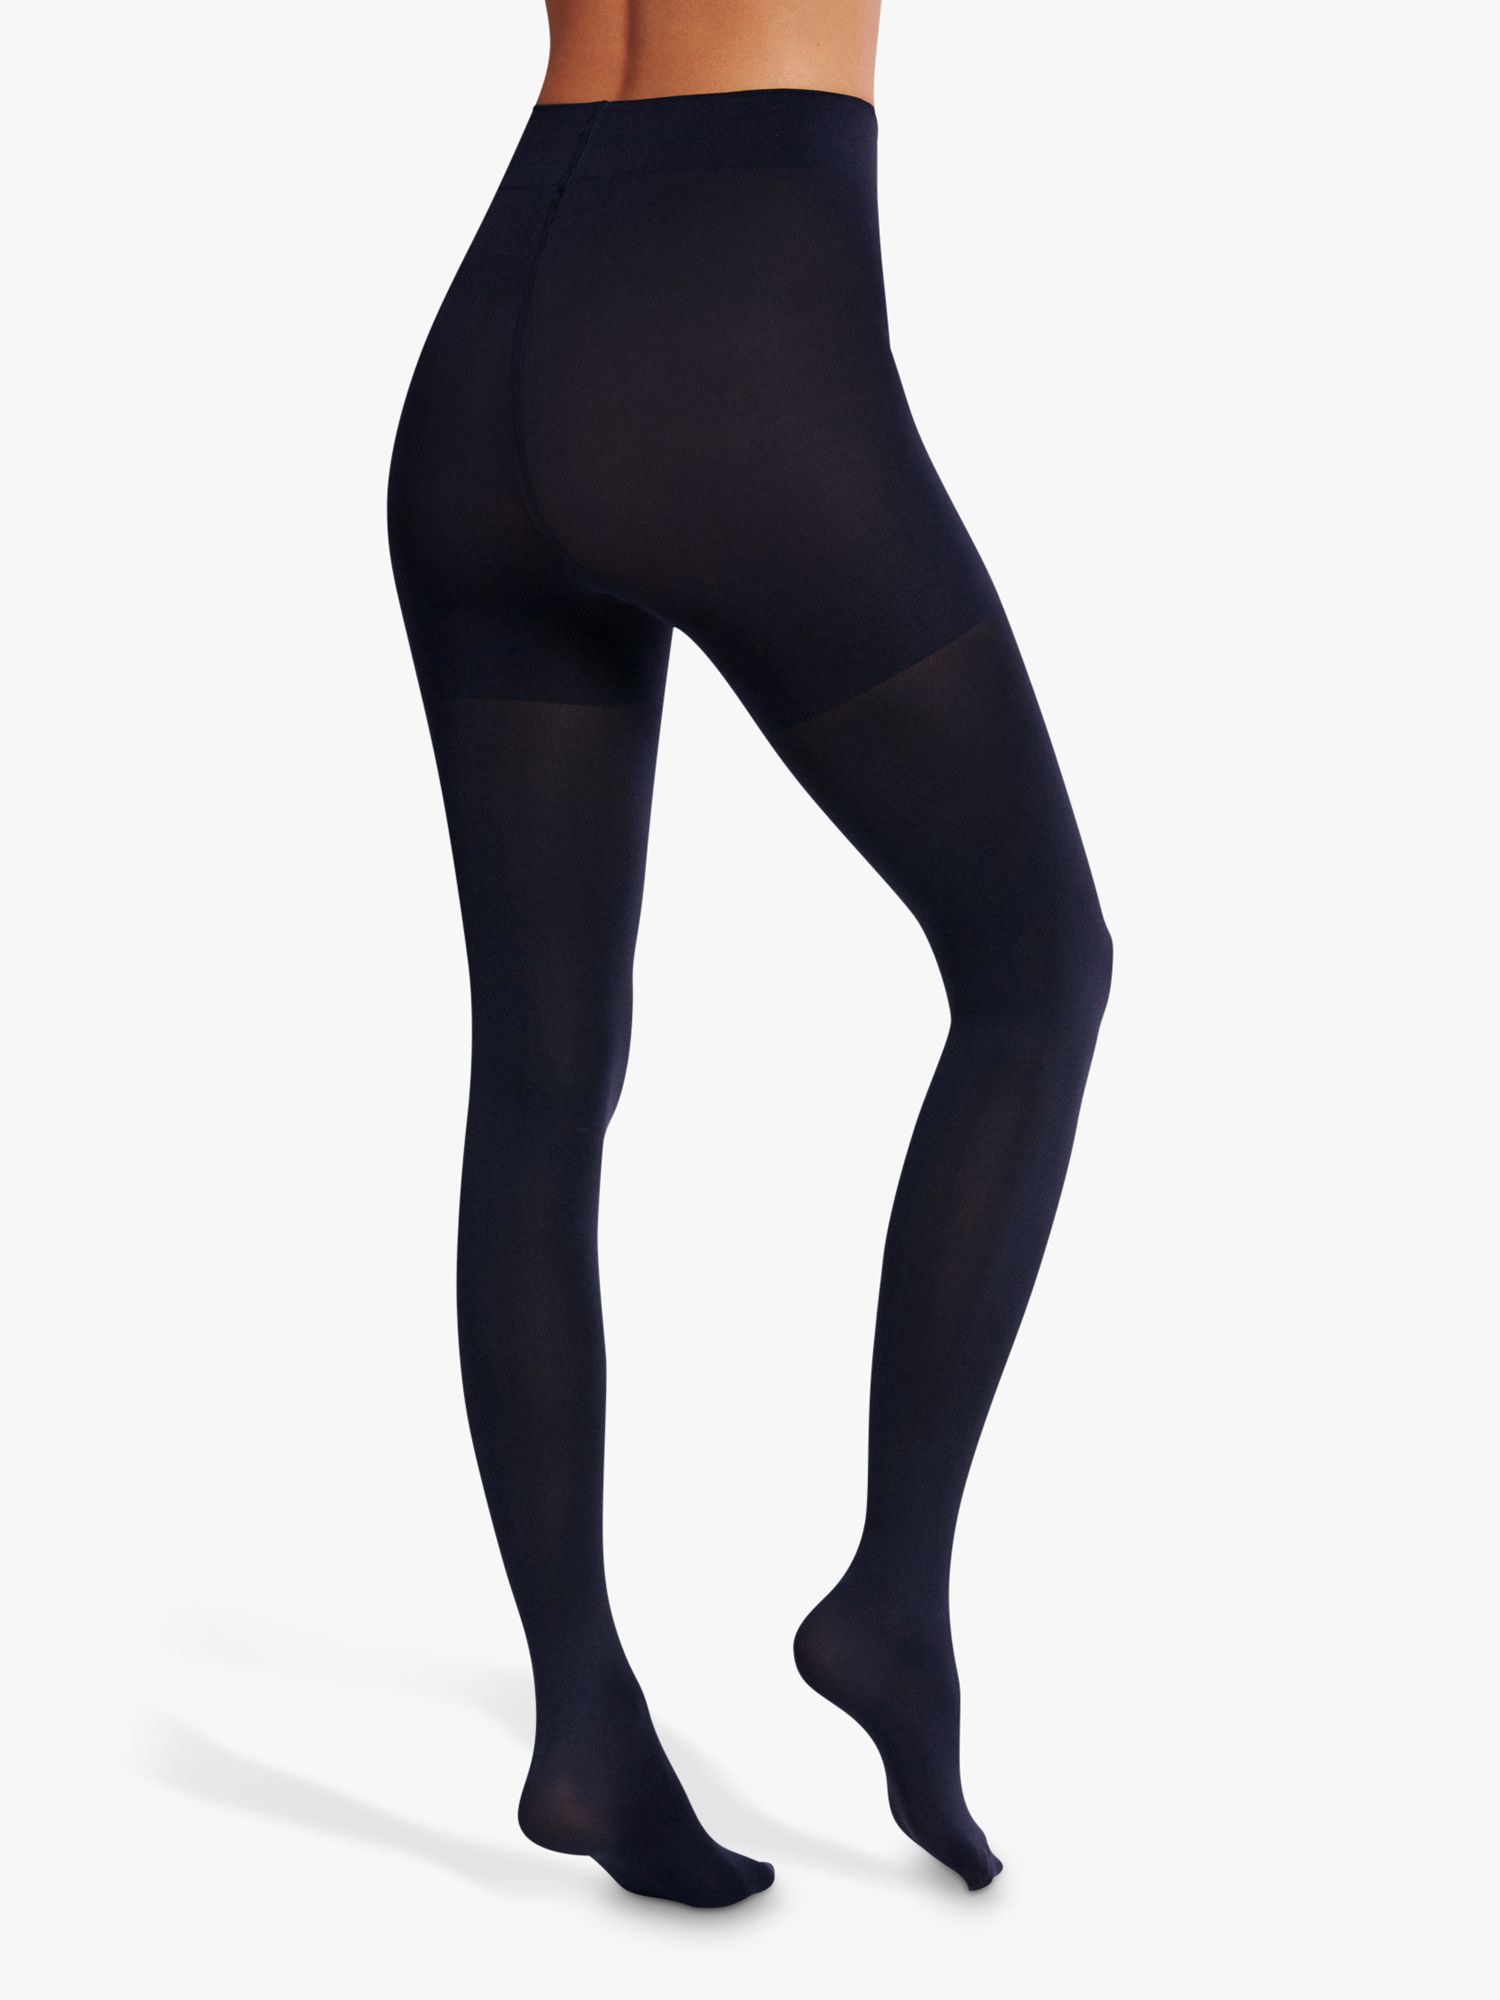 Wolford Aurora 70 Denier Opaque Tights Black At John Lewis And Partners